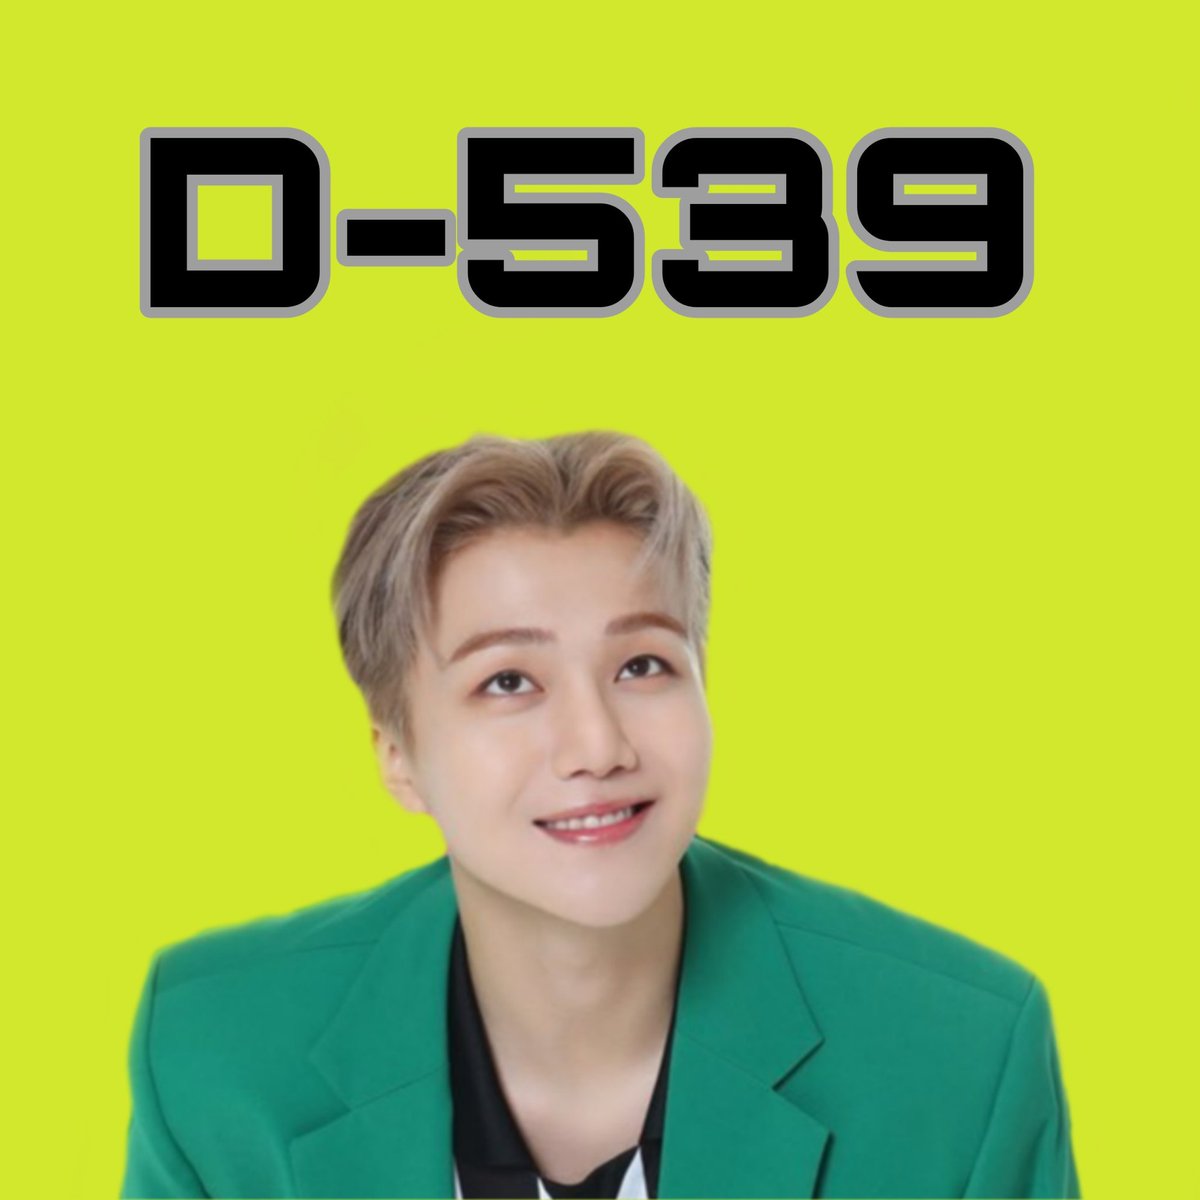 D-539- I was confused why I cannot see my d-539 tweet for jinho AND I realized I posted it on my main. Im sorry ill just post the pic now 